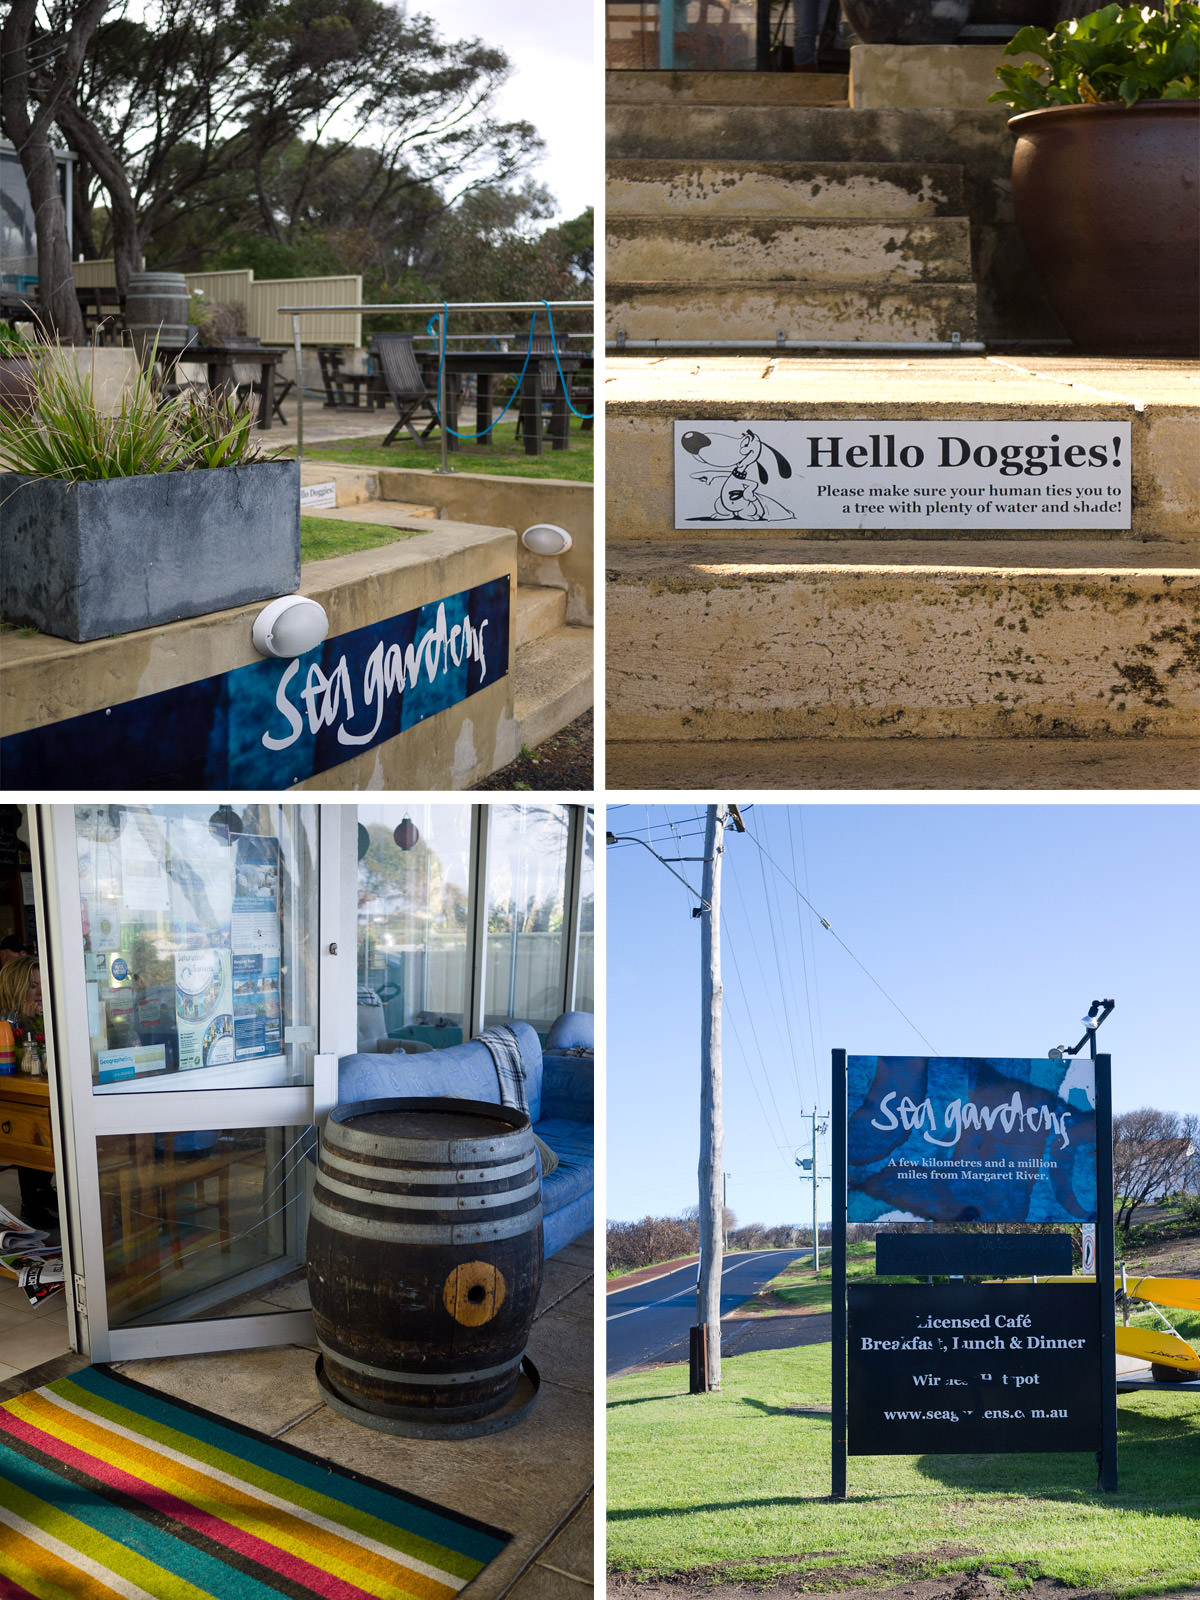 Sea Gardens - the stairs, entrance and roadside sign